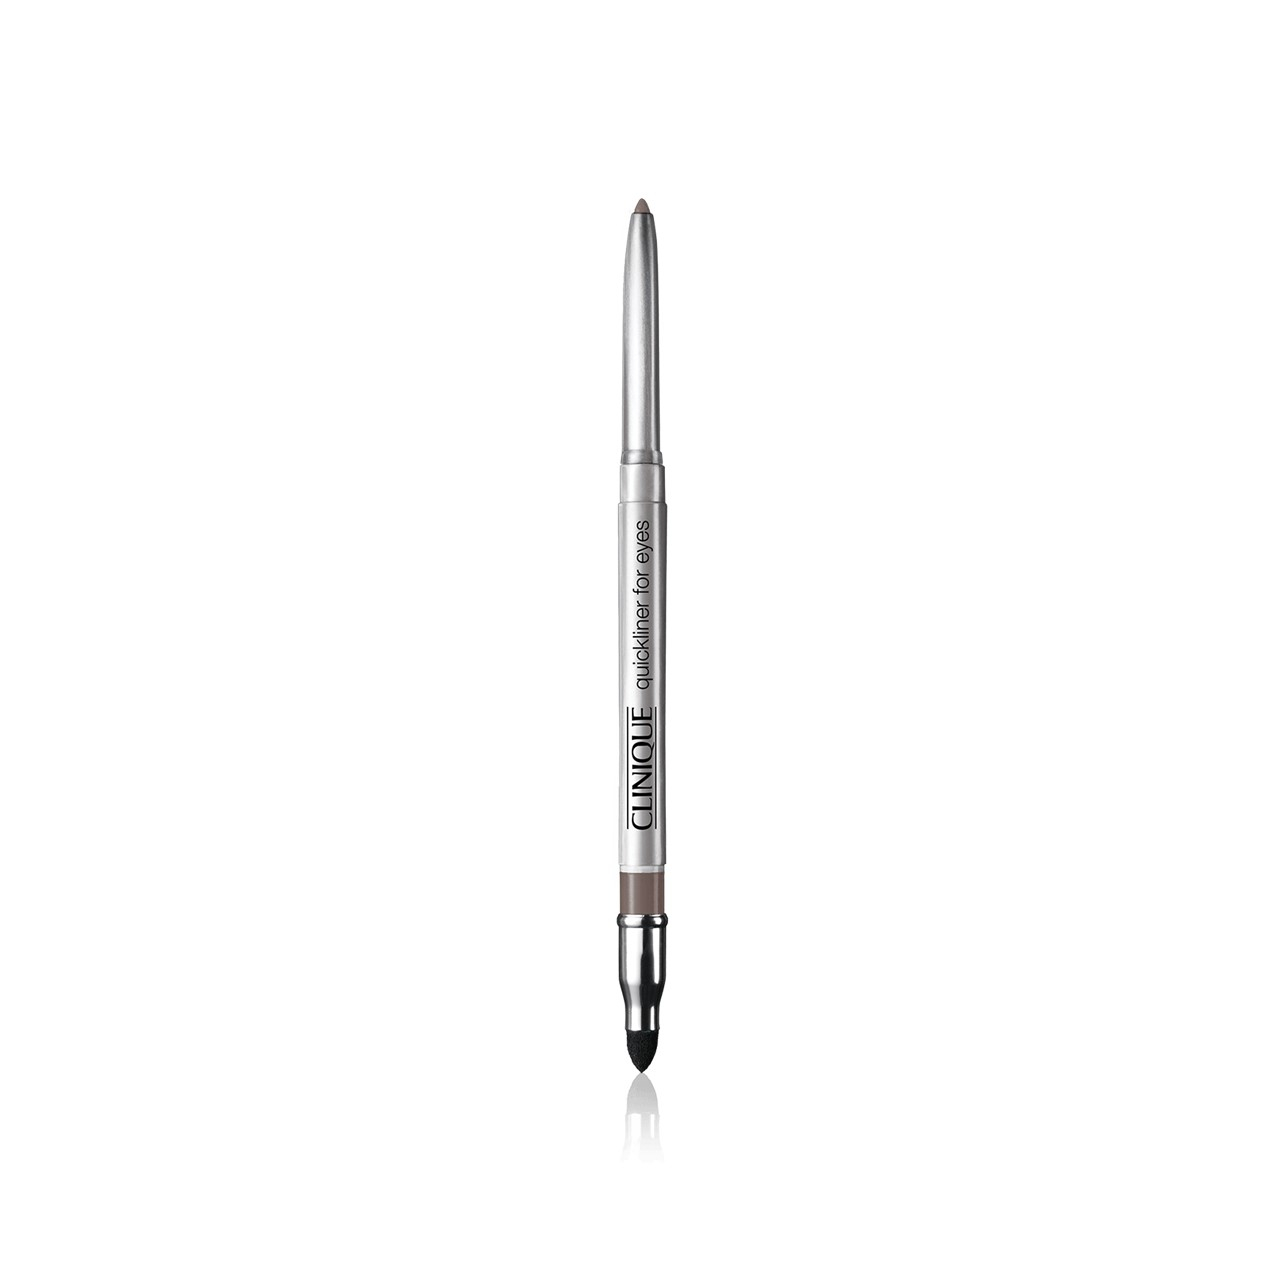 Clinique Quickliner For Eyes Smoky Brown 0.3g